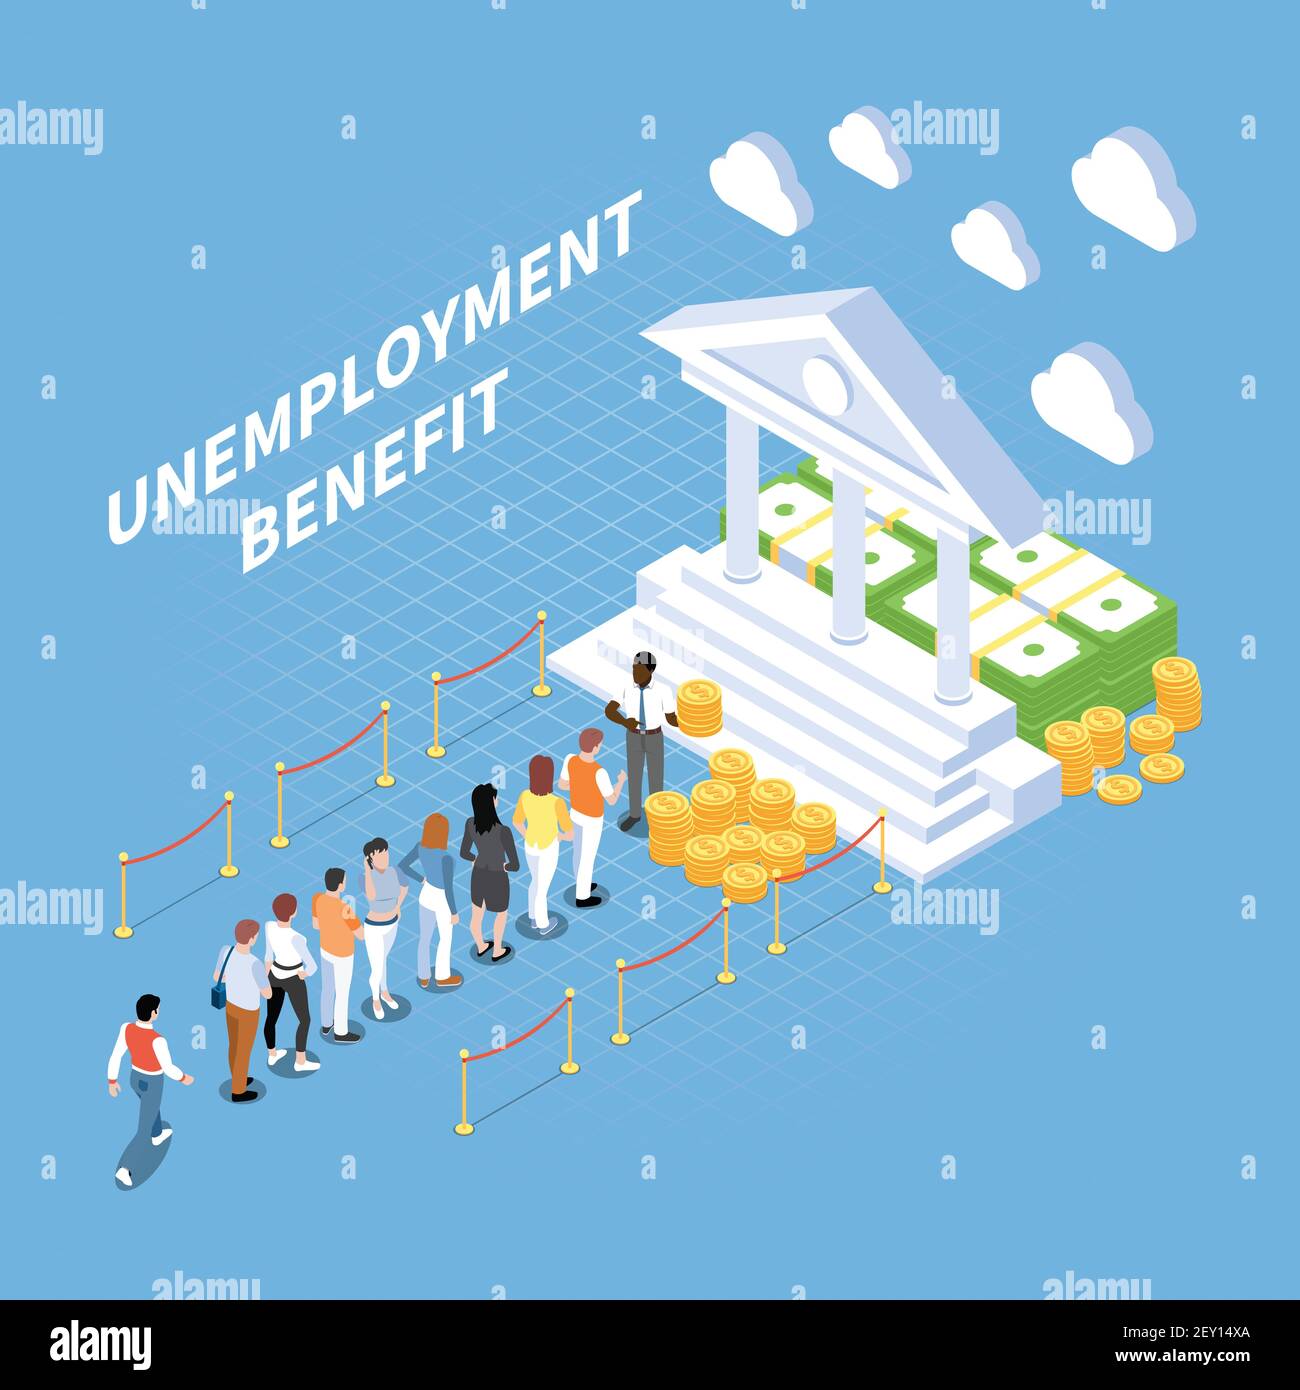 Social security unemployment benefits unconditional income isometric composition with people and conceptual image of classic facade vector illustratio Stock Vector